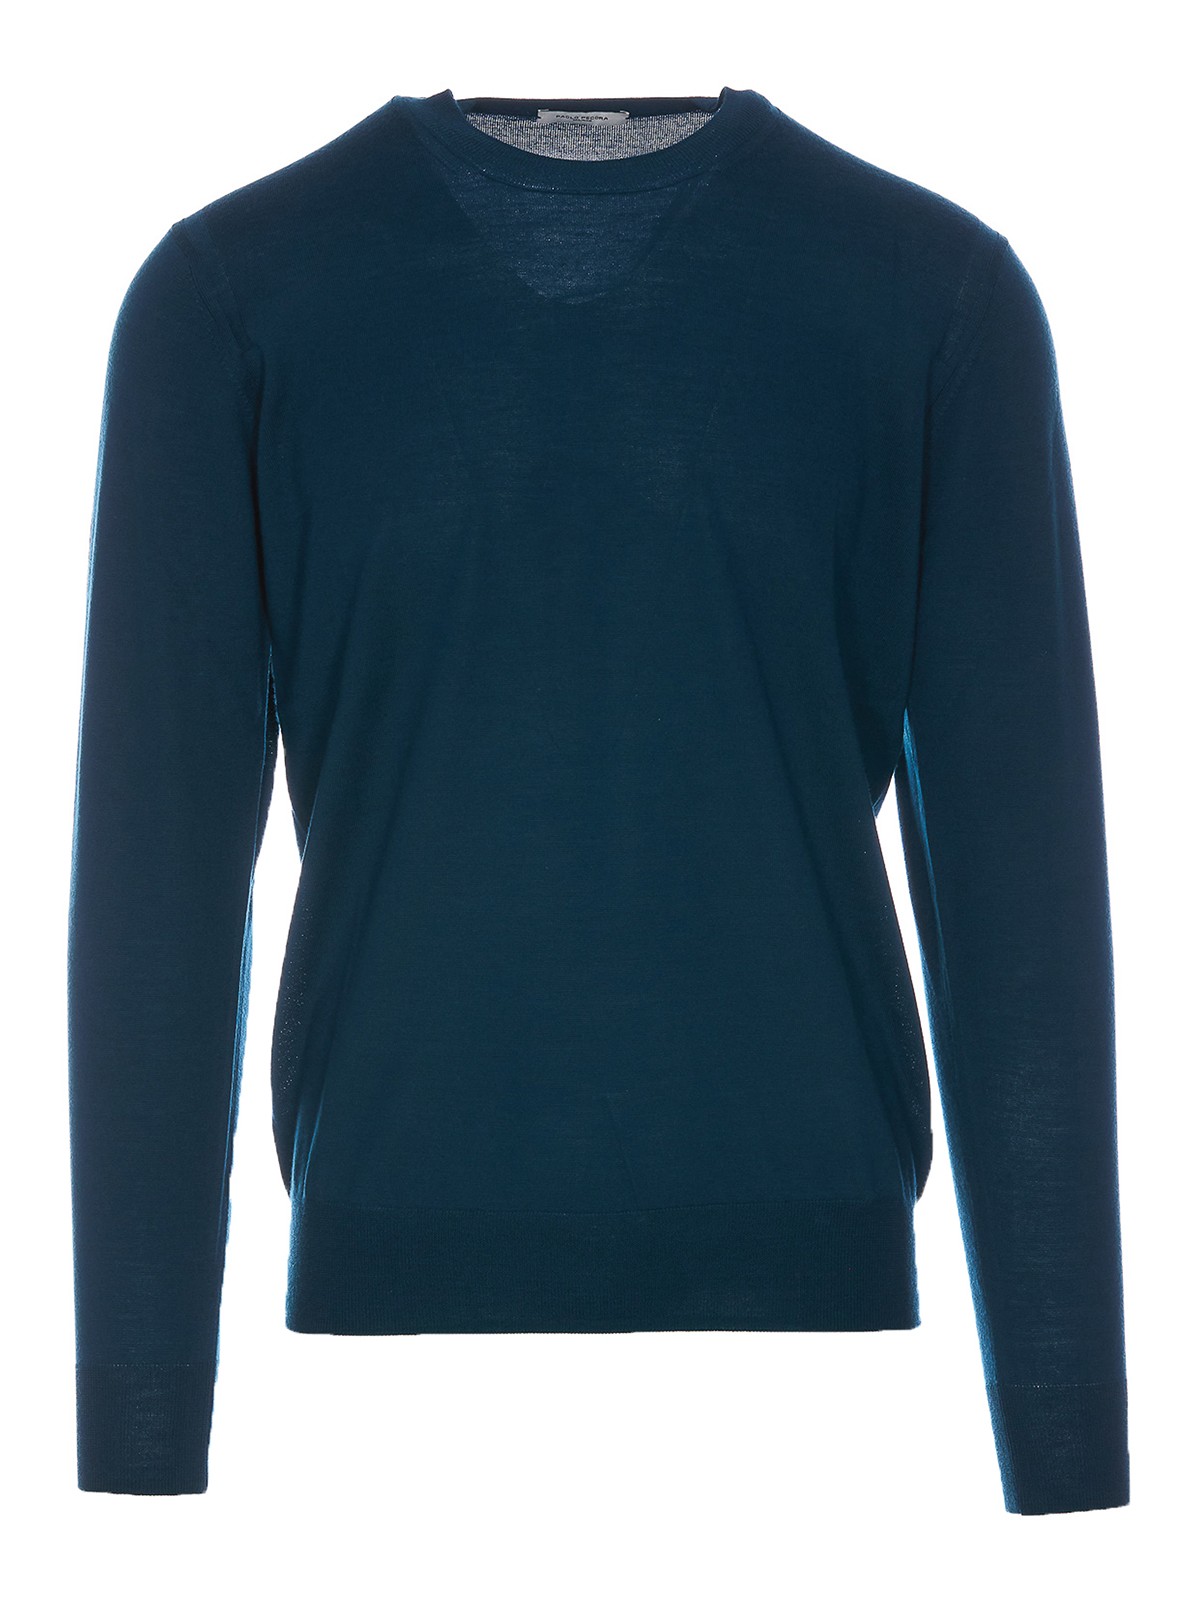 Paolo Pecora Green Jumper In Blue